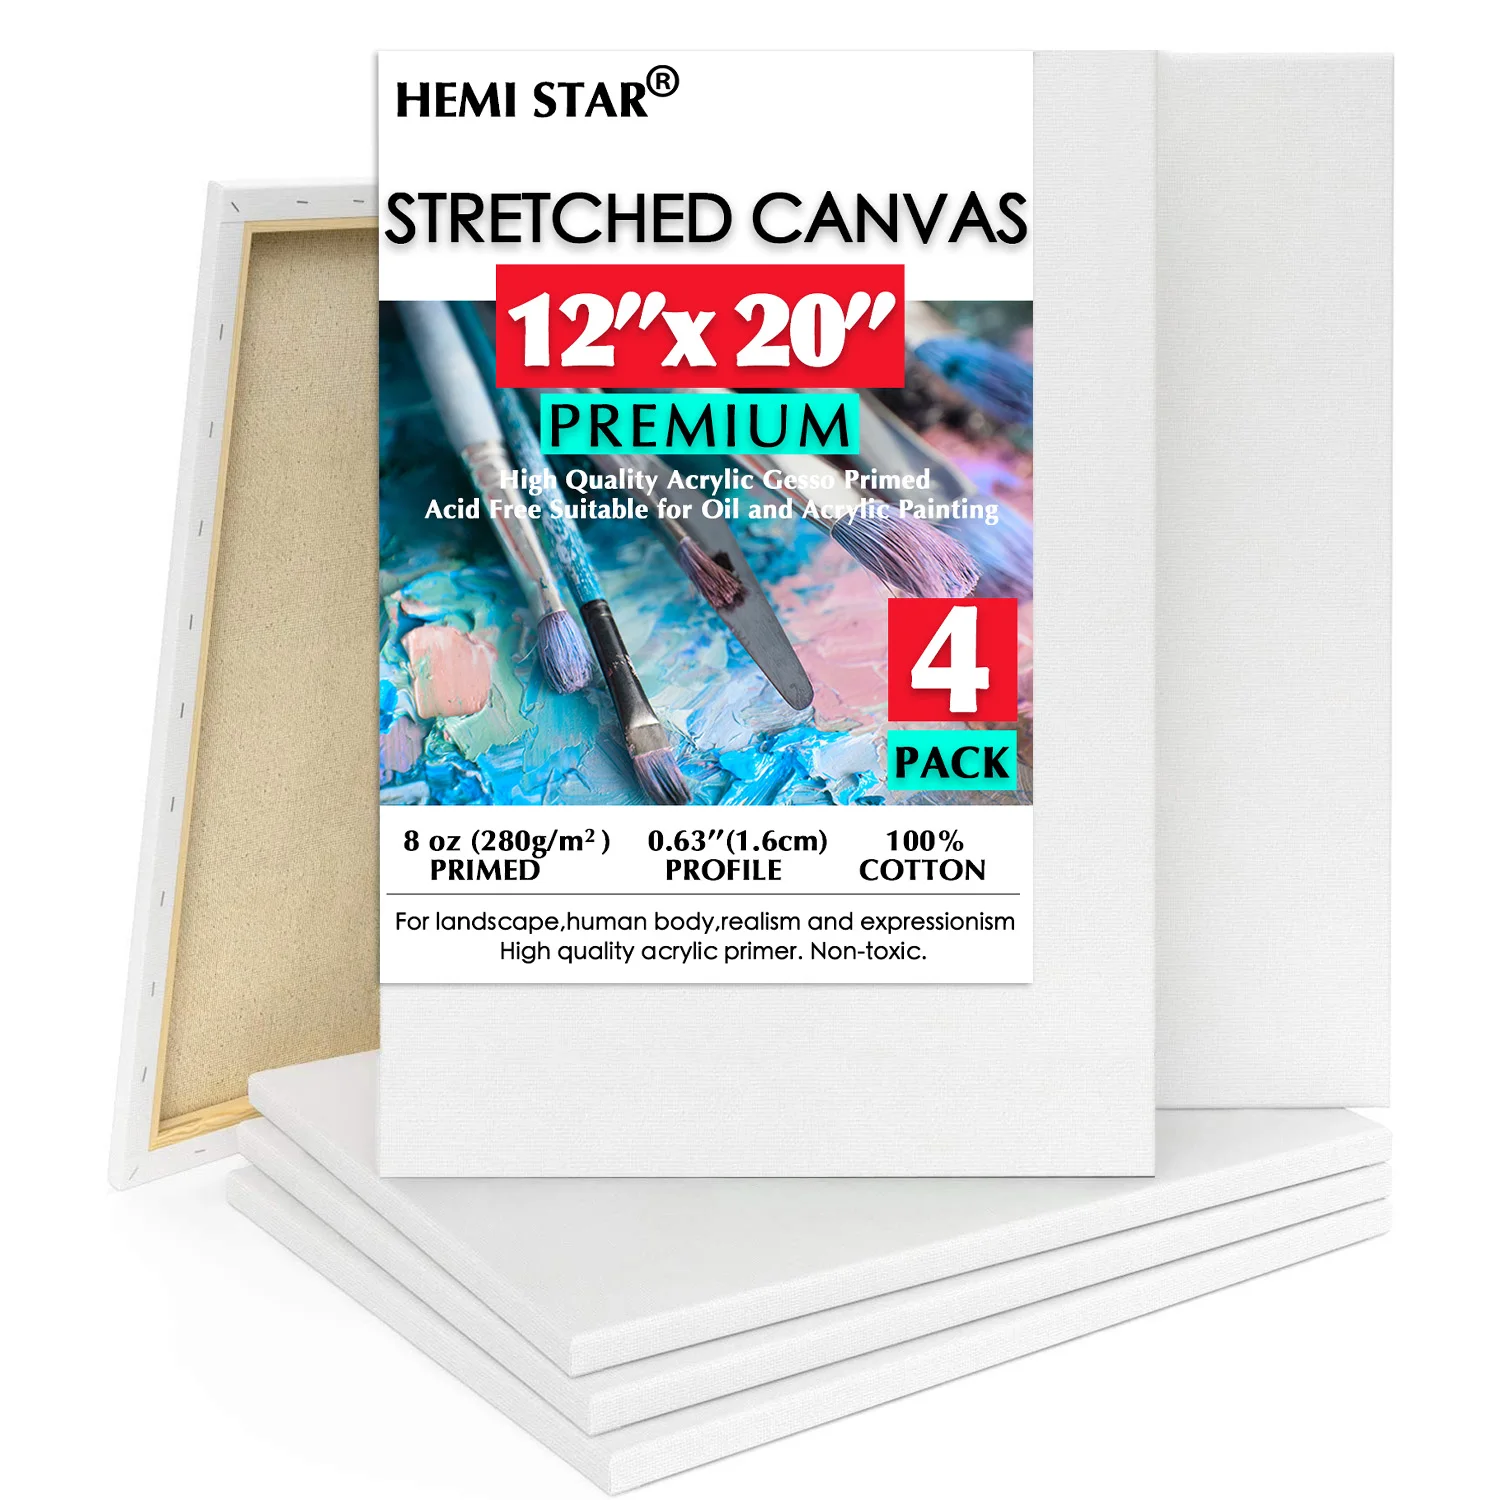 

4 Pack Stretched Canvas for Paint 30x50cm,12x20 inch Primed White 100% Cotton Blank Canvas Boards for Painting 8 oz Gesso-Primed